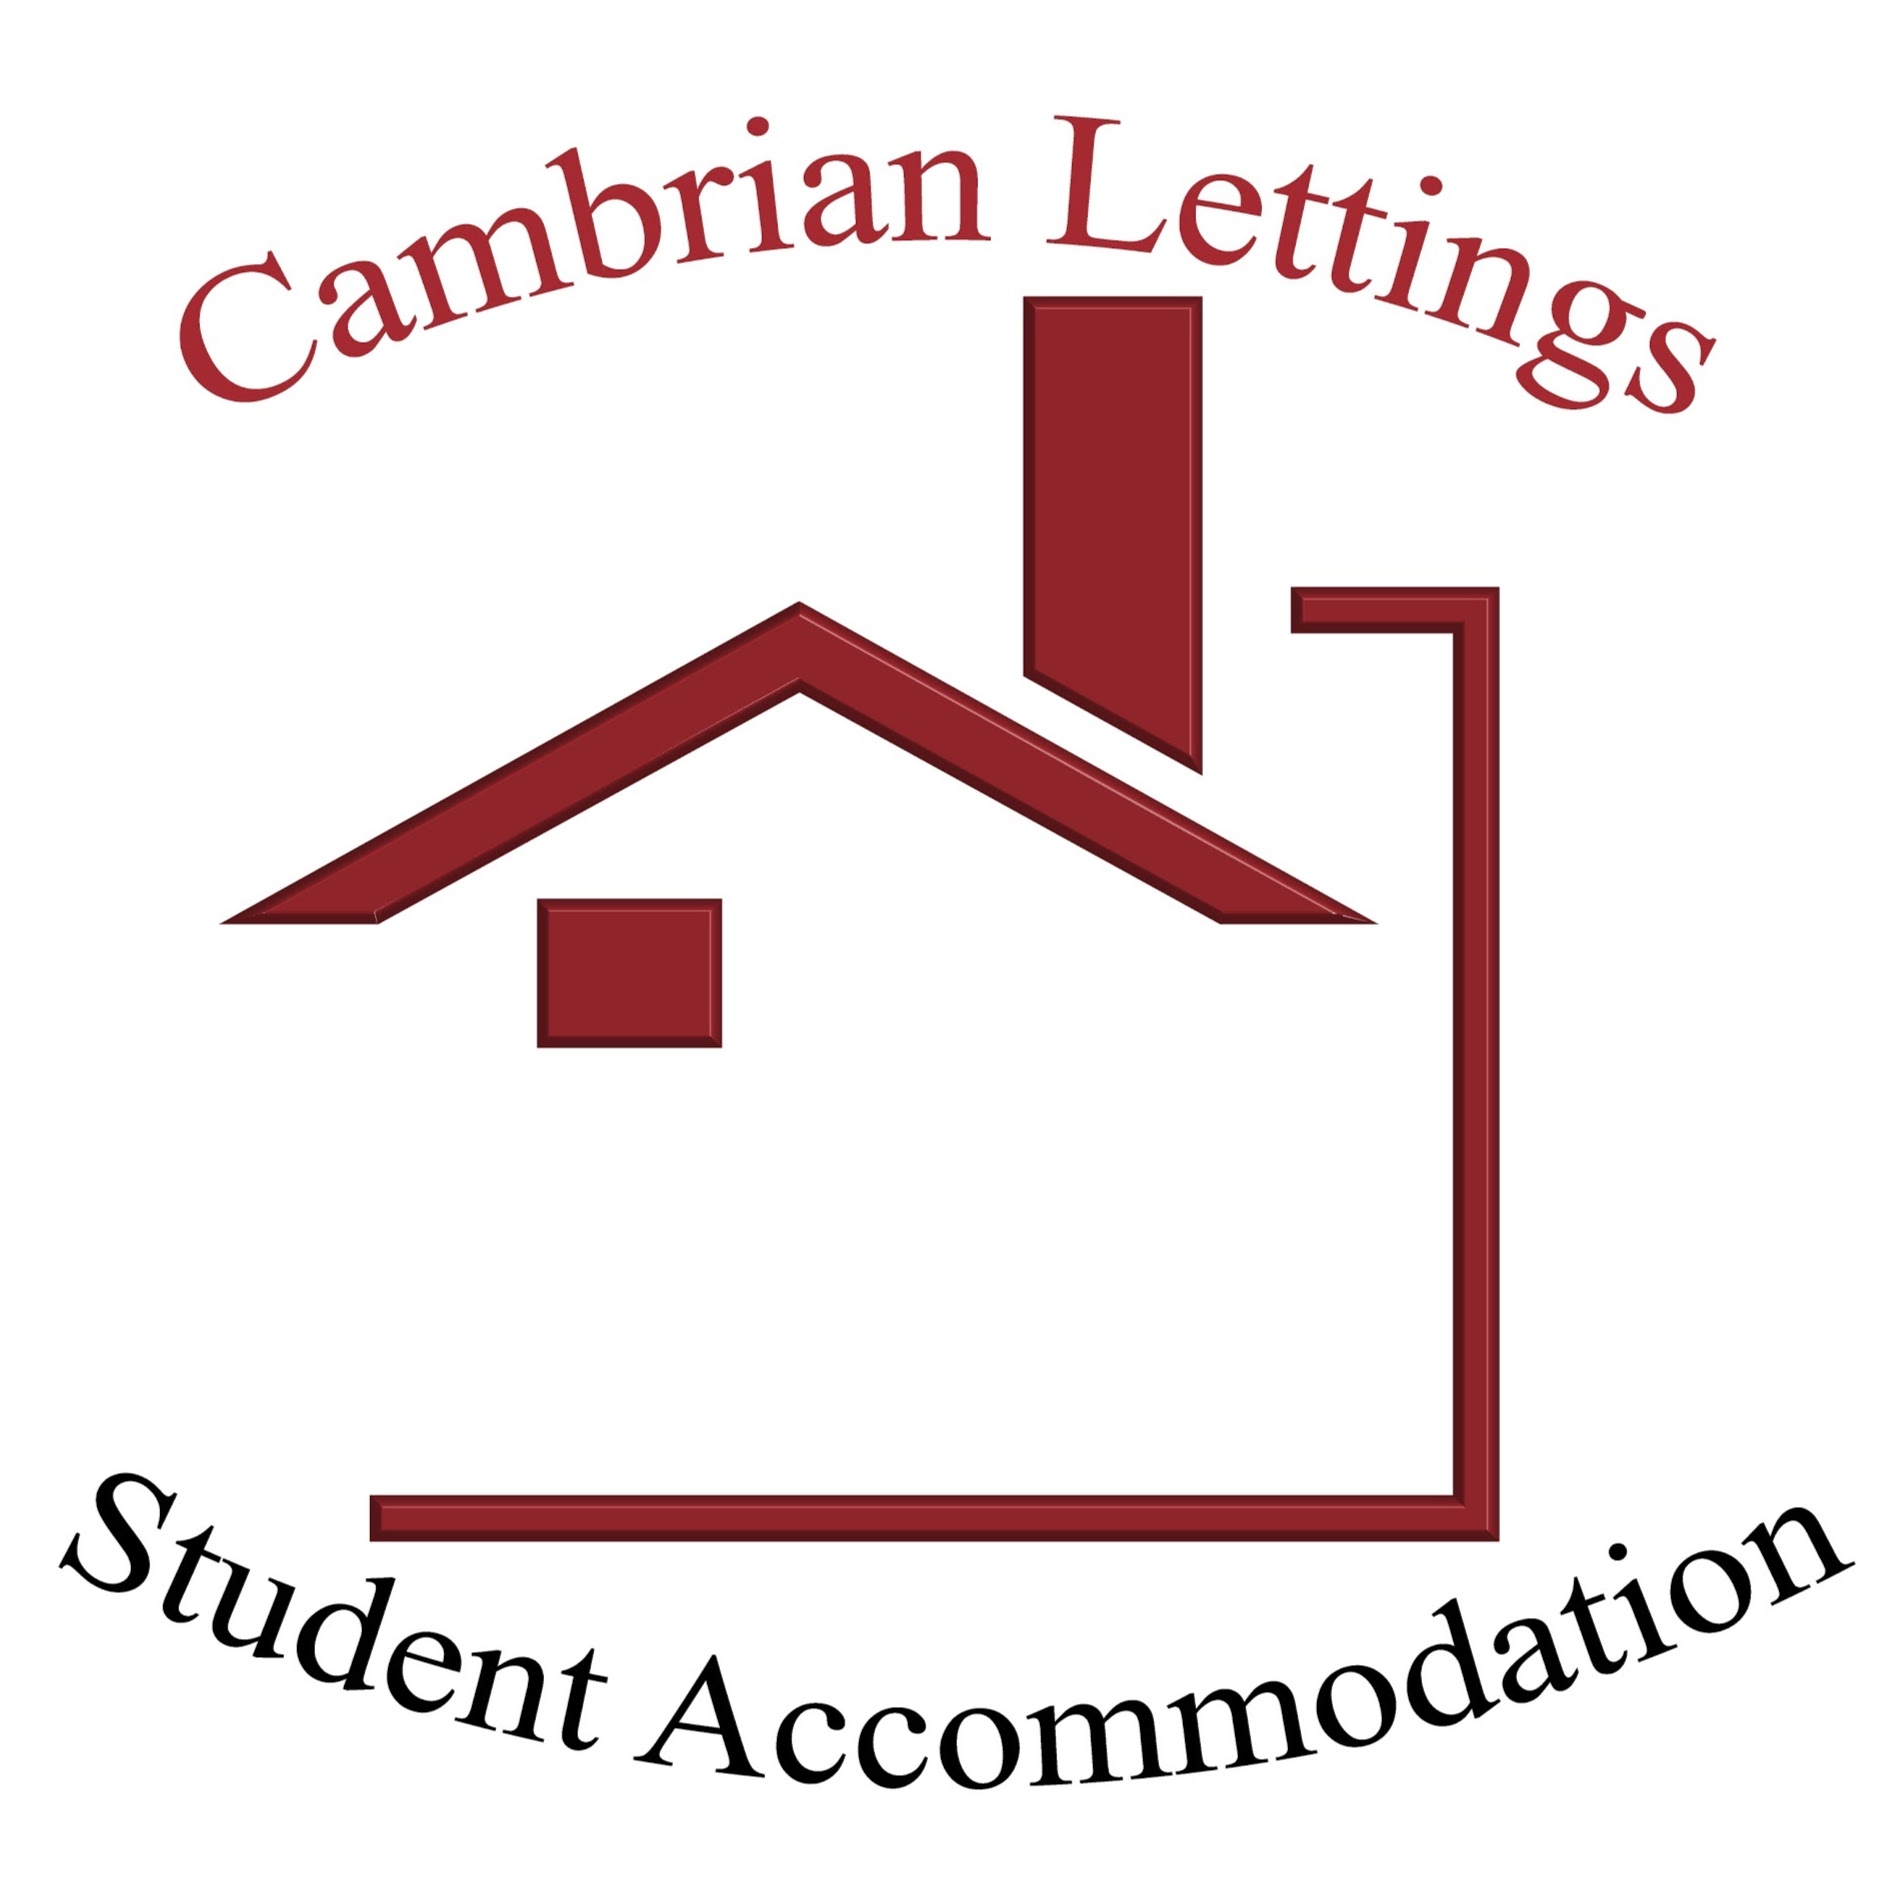 Cambrian Lettings Student Housing And Accommodation Chester | 70 Whipcord Lane, Chester CH1 4DF | +44 1244 372144